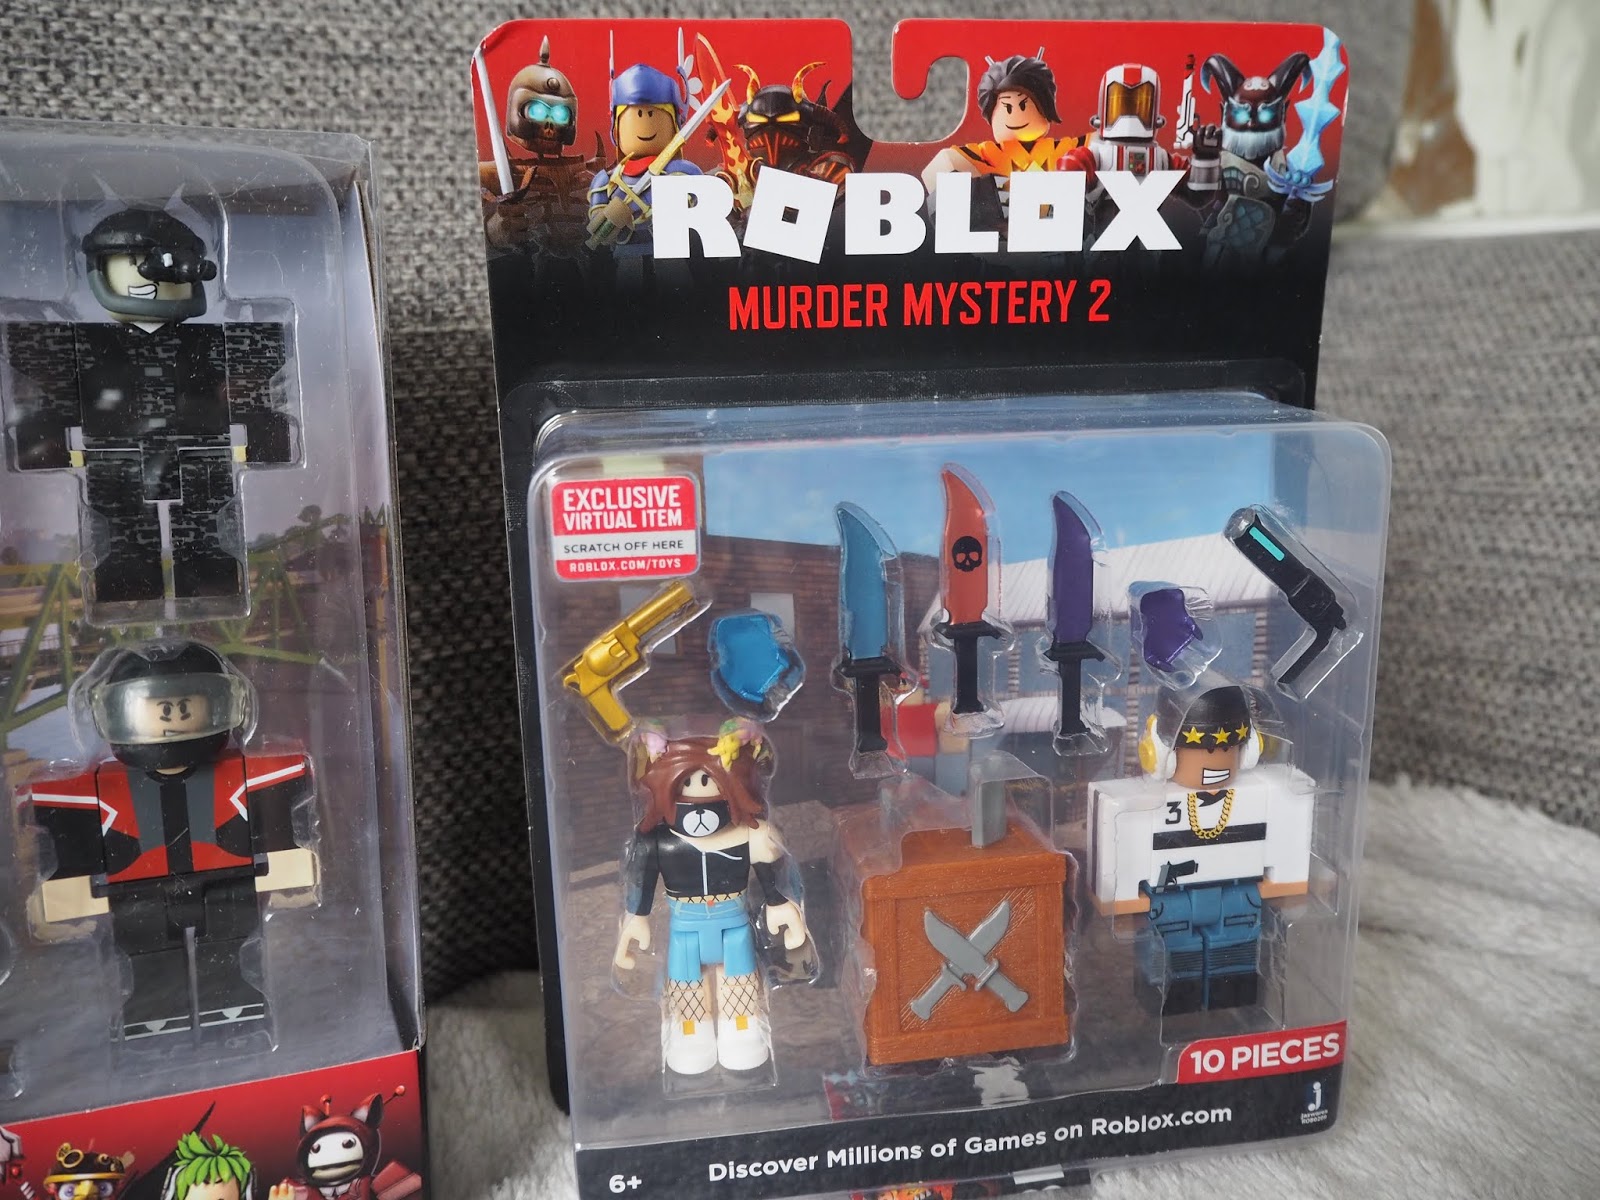 ROBLOX, Toys